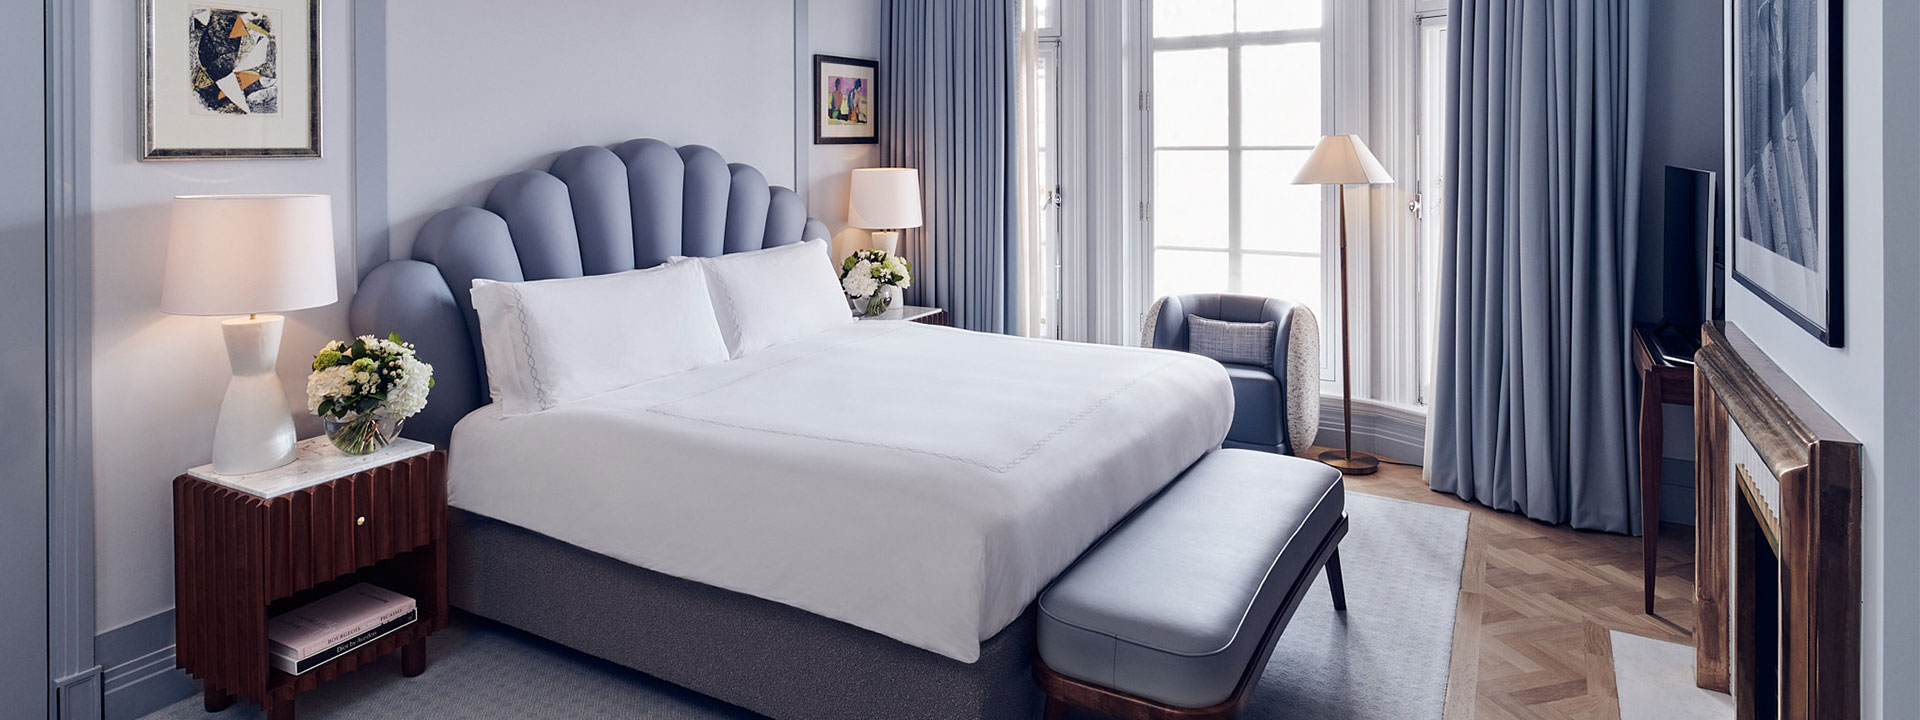 A comfortable King Bed in the Mayfair Terrace Suite, surrounded by elements in pastel blue-grey colours.